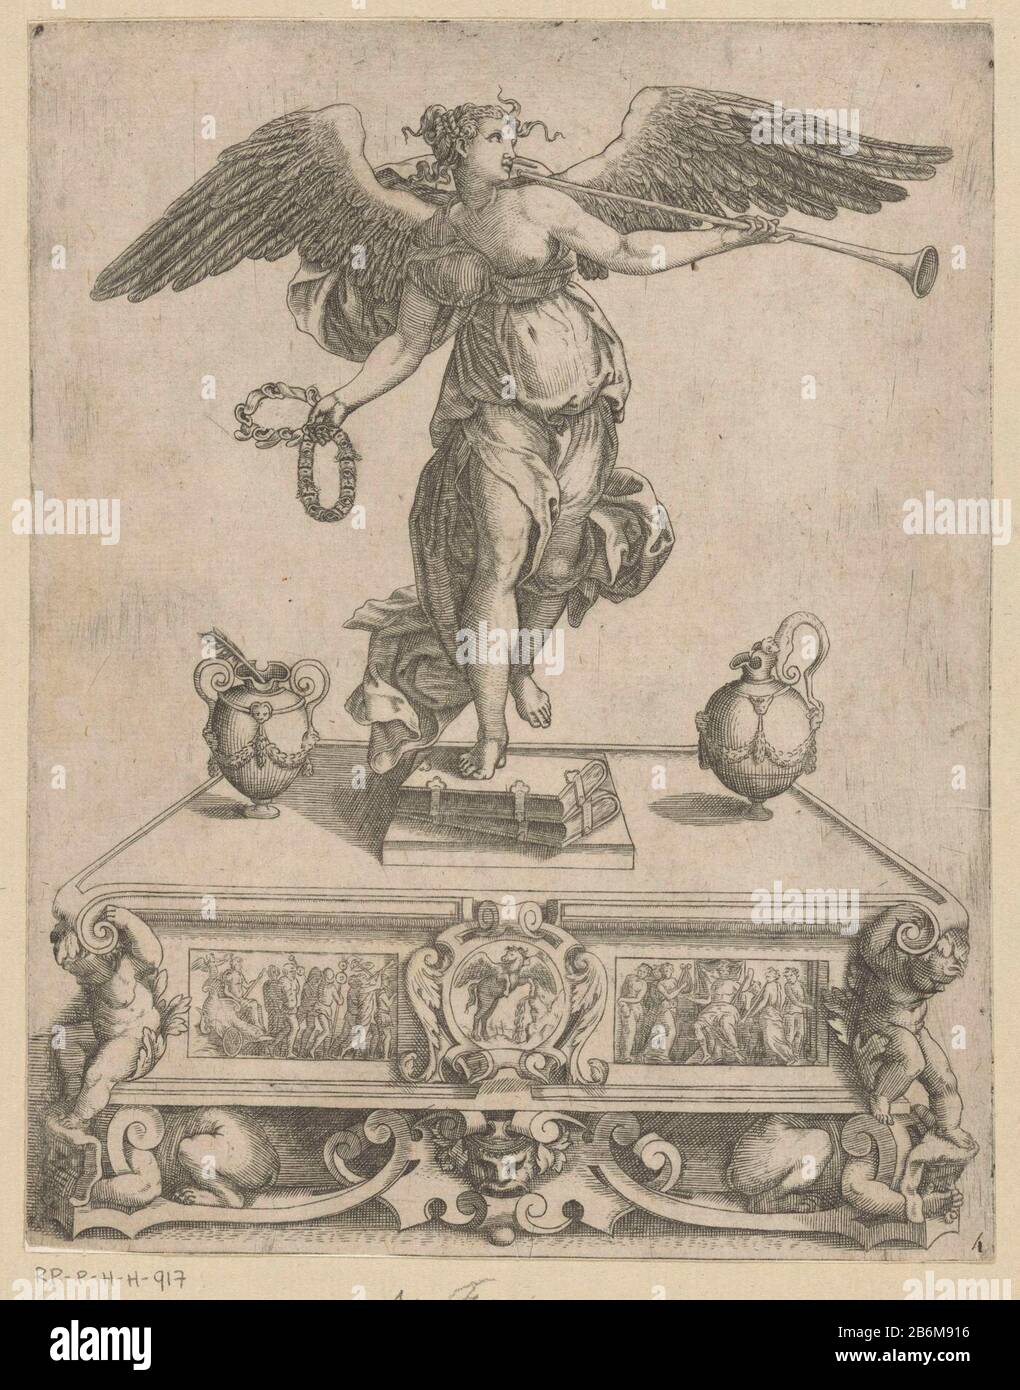 Faam Fame as a winged female figure, standing on two books and blowing a trumpet. In her hand she holds two rings formed by ears, tongues and ogen. Manufacturer : print maker: anonymous location manufacture: Italy Date: 1500 - 1599 Physical characteristics: etching and engra with plate tone material: paper Technique: engra (printing process) / etch / plate tone dimensions: sheet: h 224 mm (inner plate edge cut) b × 175 mm (inner plate edge cut)  Subject: Fame; 'Fama', 'Fama buona', 'Fama chiaramonte' (RIPA) horn, trumpet, cornet, trombone, tuba ears eyes tongue Stock Photo